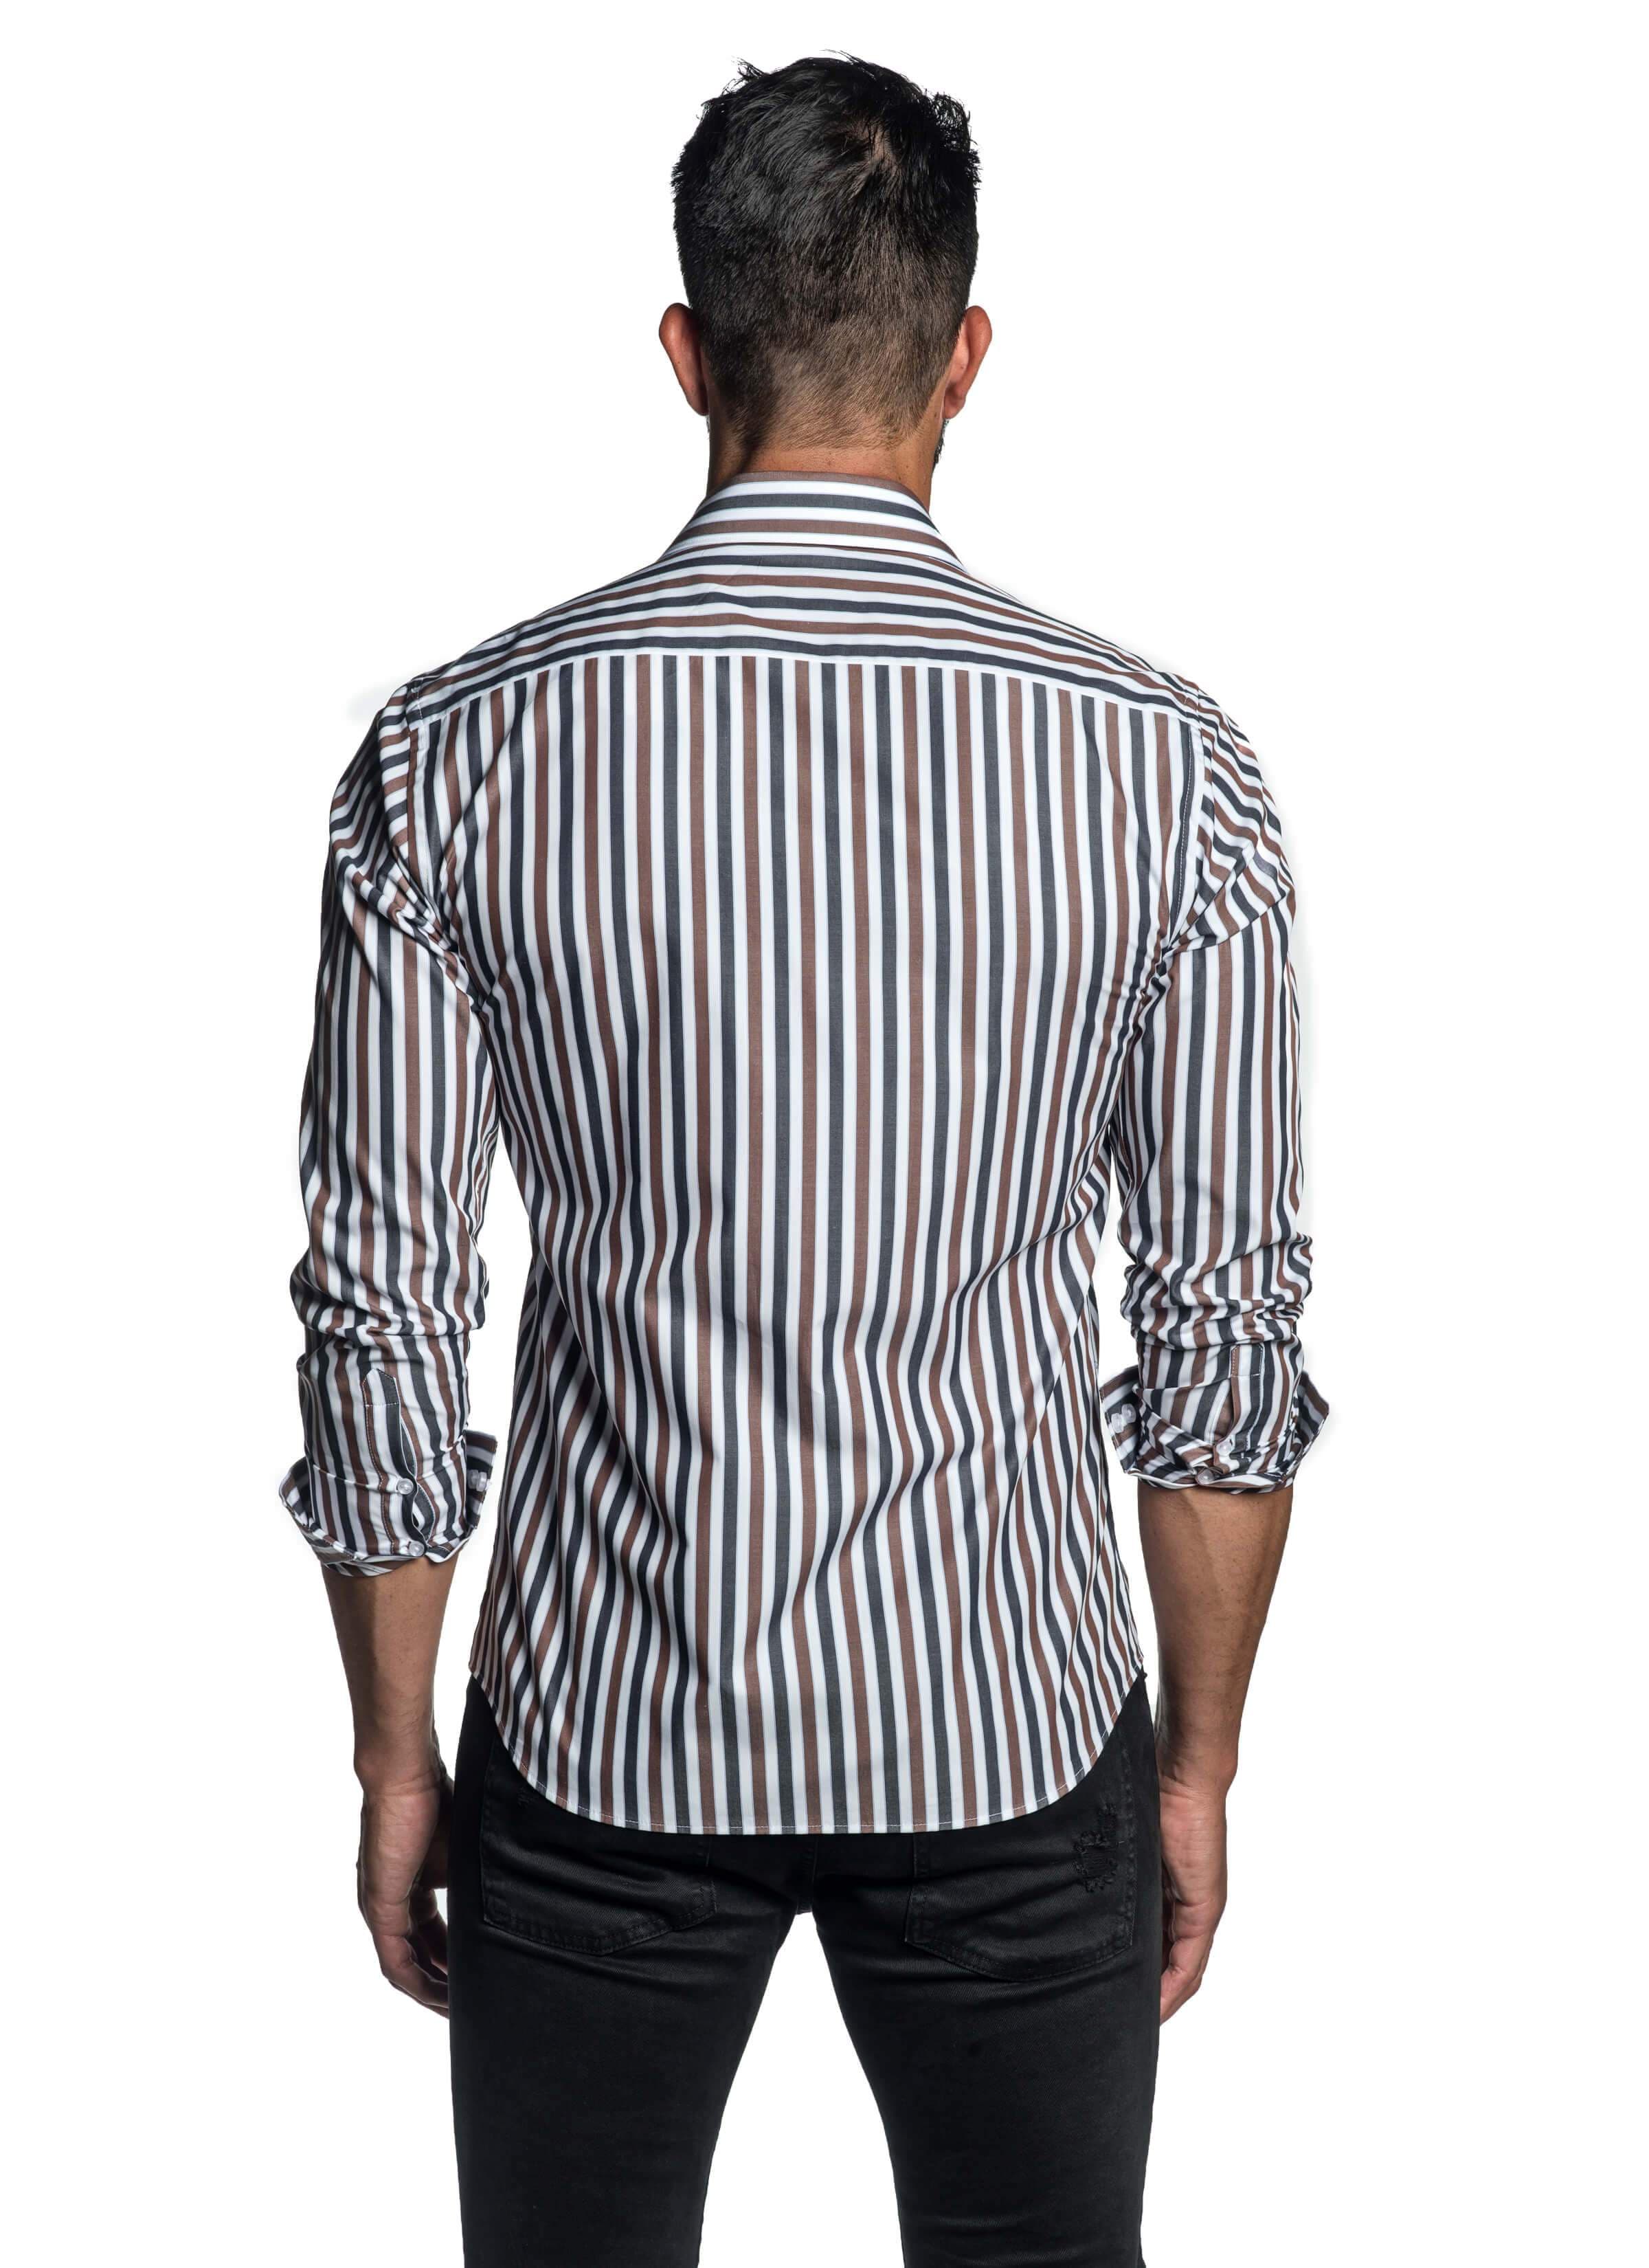 Blue and Brown Stripe Shirt for Men T-2612